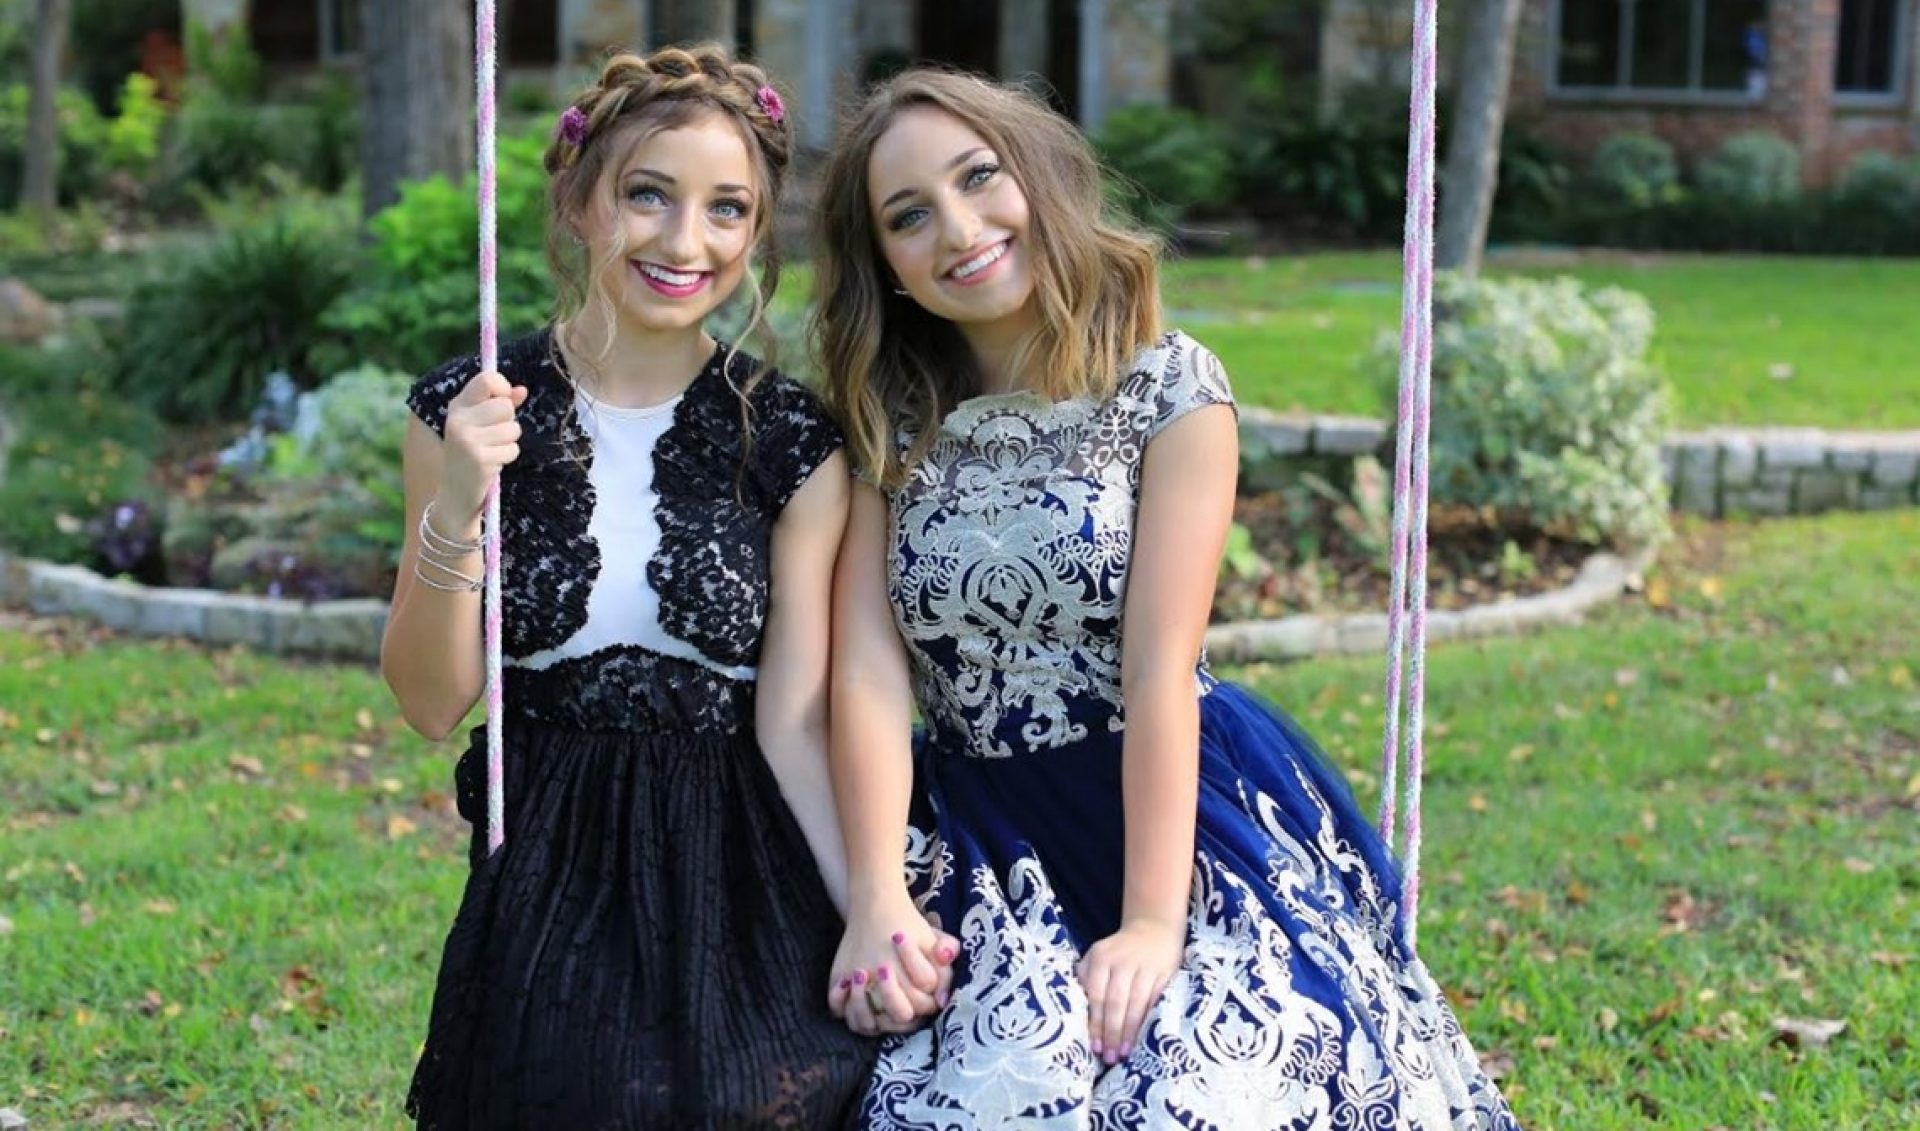 YouTube Duo Brooklyn And Bailey Venture Into Music With Debut Single ‘Dance Like Me’